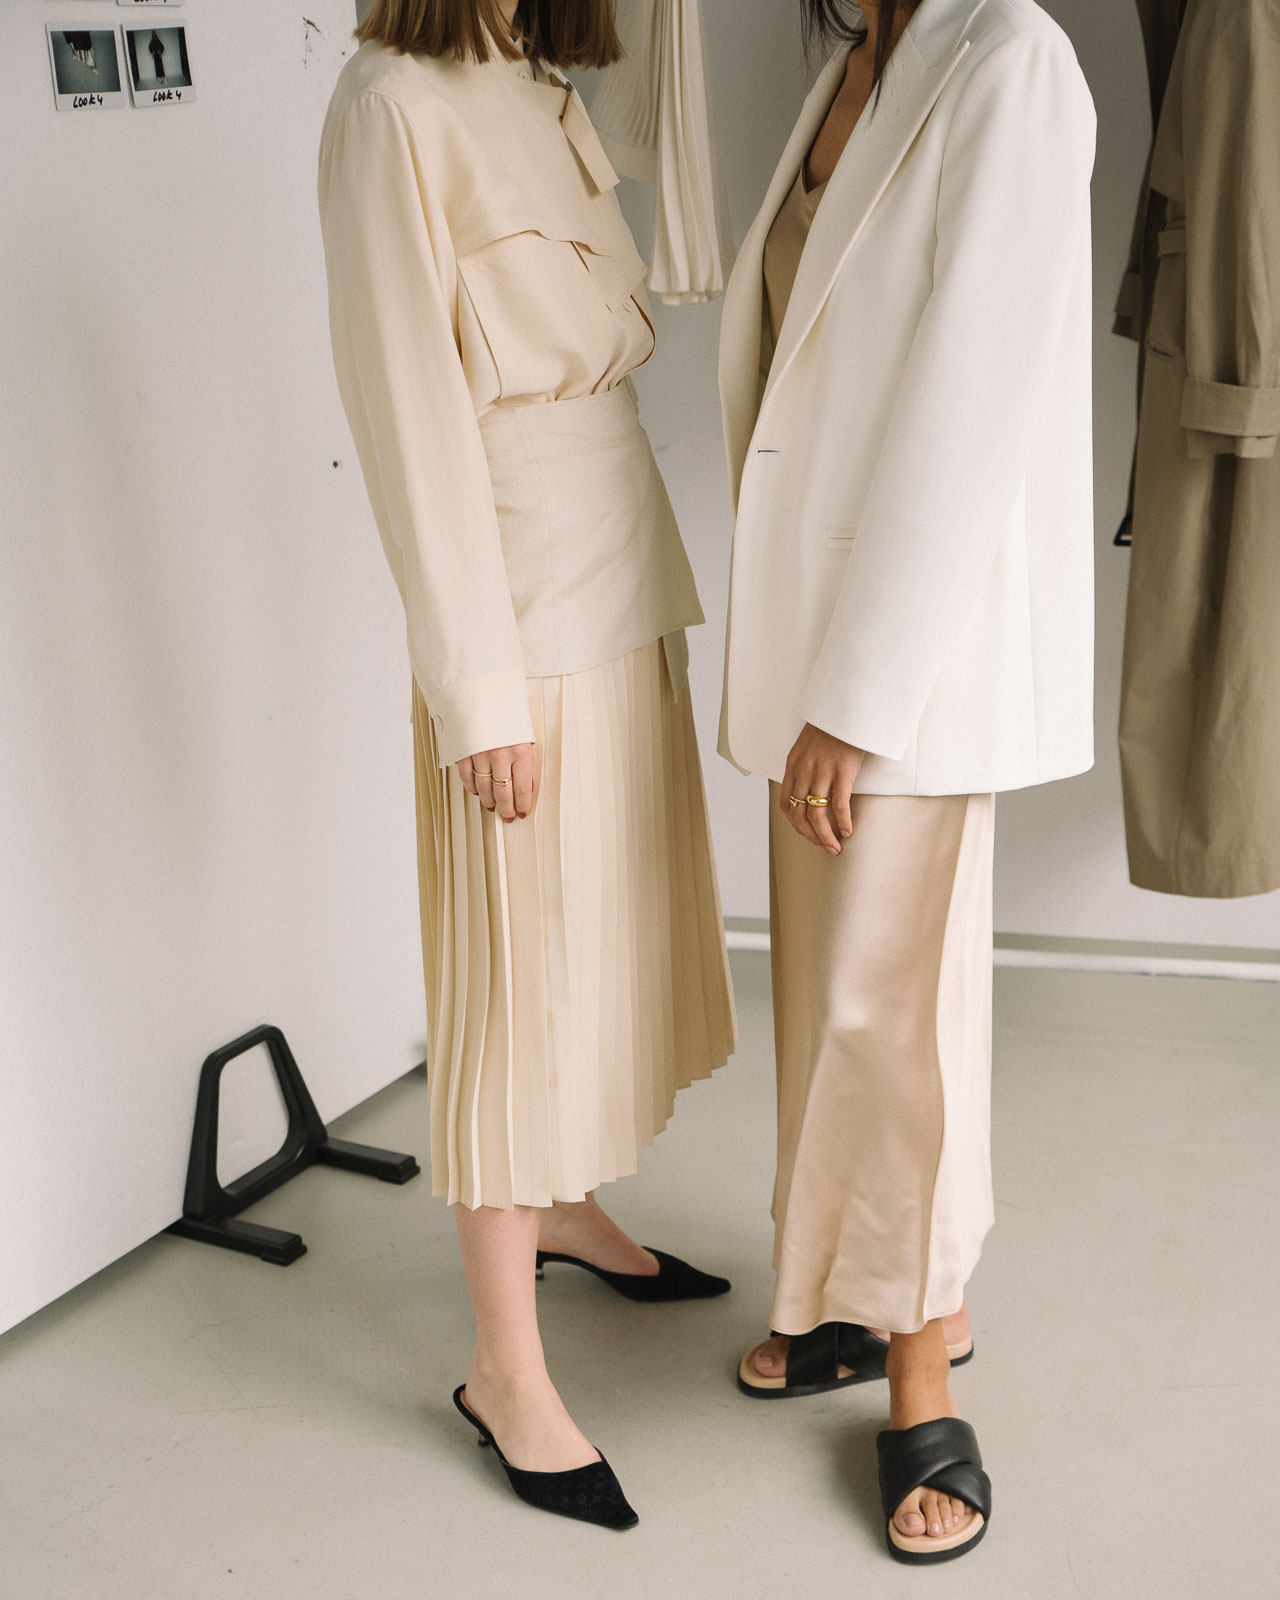 storm wears Stone Silk Satin Dress from Joseph SS19 collection and Swantje Soemmer wears Billie Boucle Fuji Silk Skirt shot by Marius Knieling